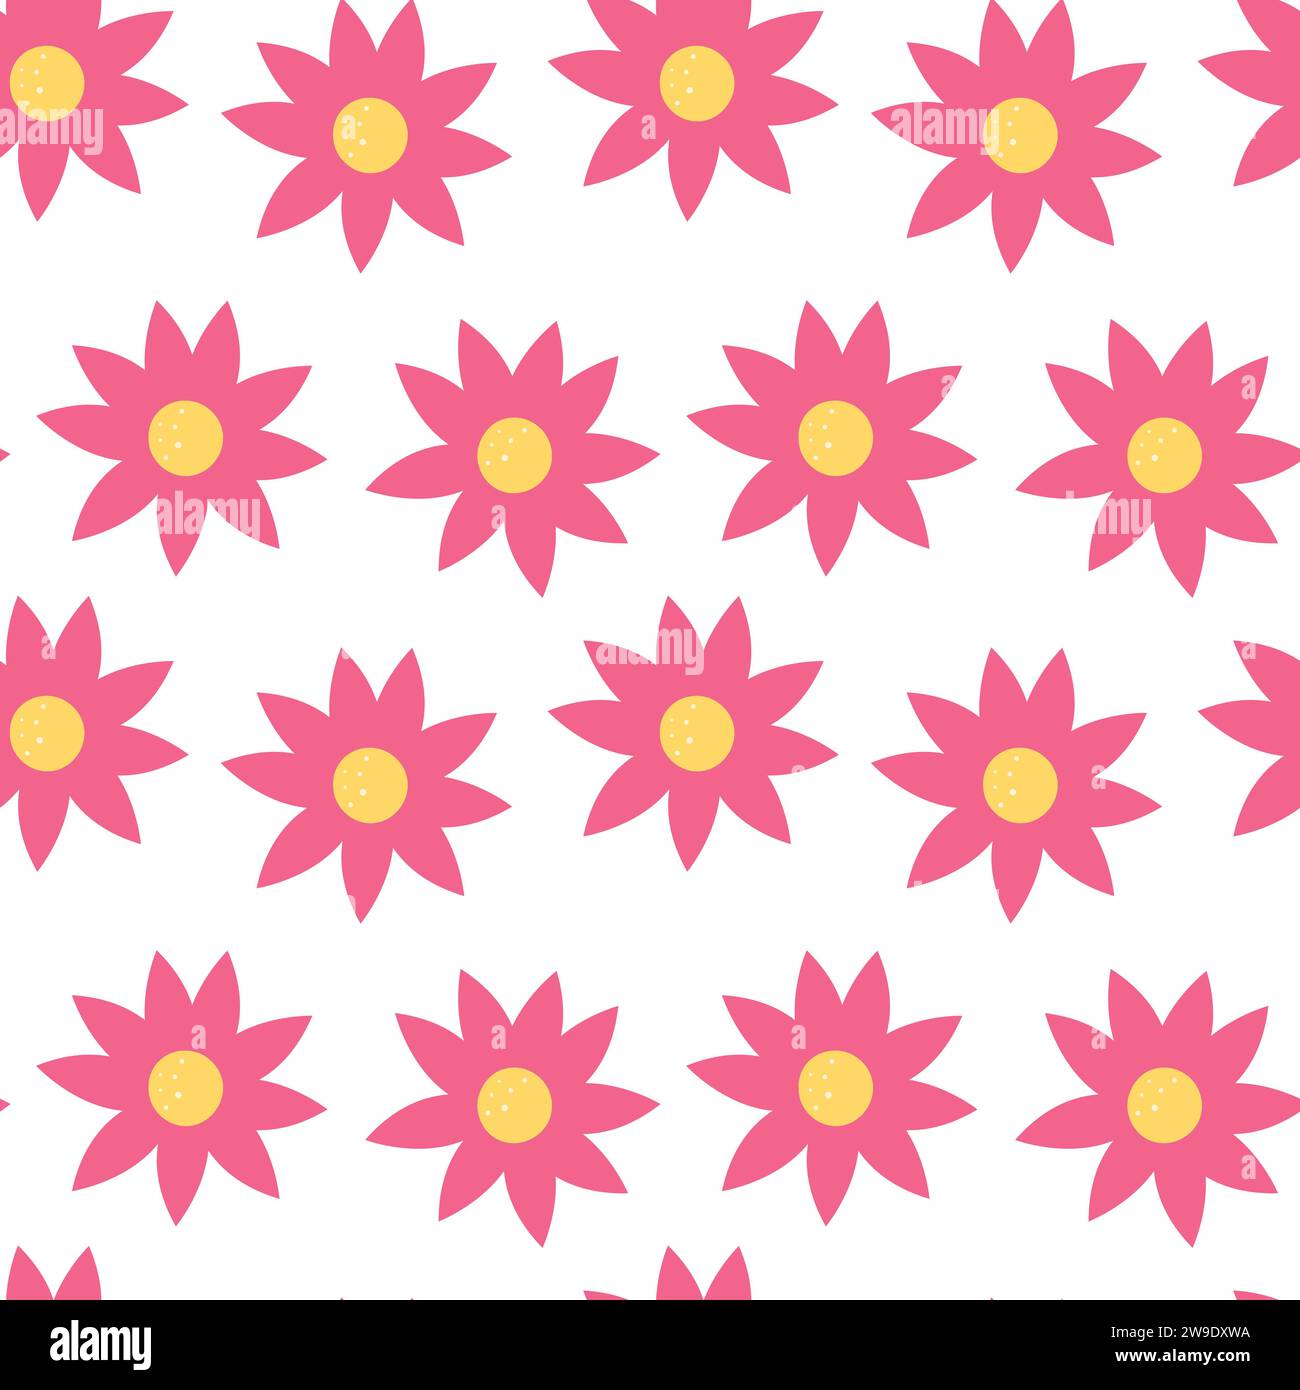 Funky pink y2k floral seamless pattern. Doodle retro style illustration background. Stock Vector